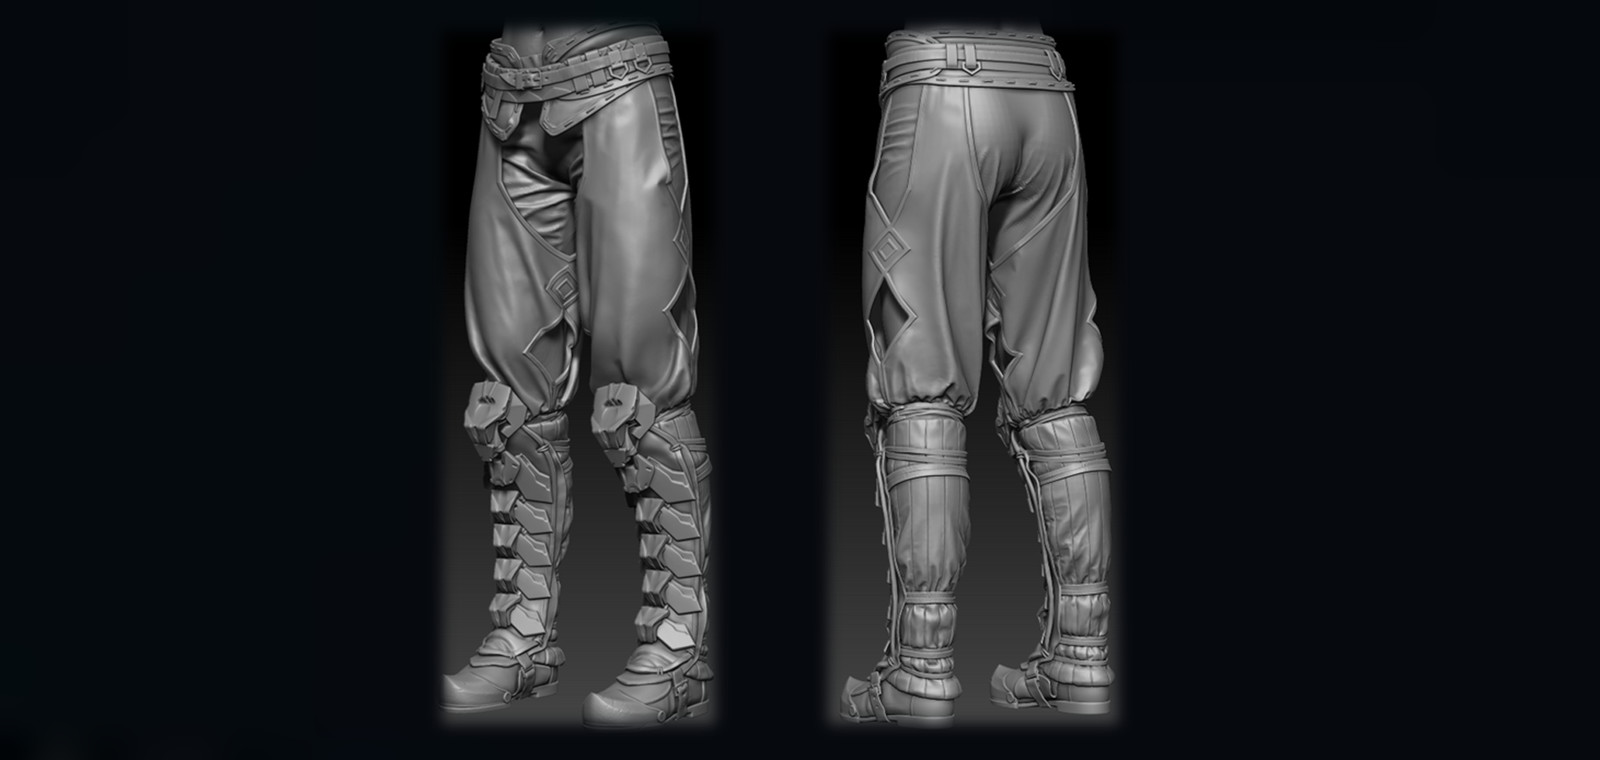 We used Marvelous Designer to create these realistic simulated pants. We looked for the right balance between a straight cut and the clothes' natural wrinkles.